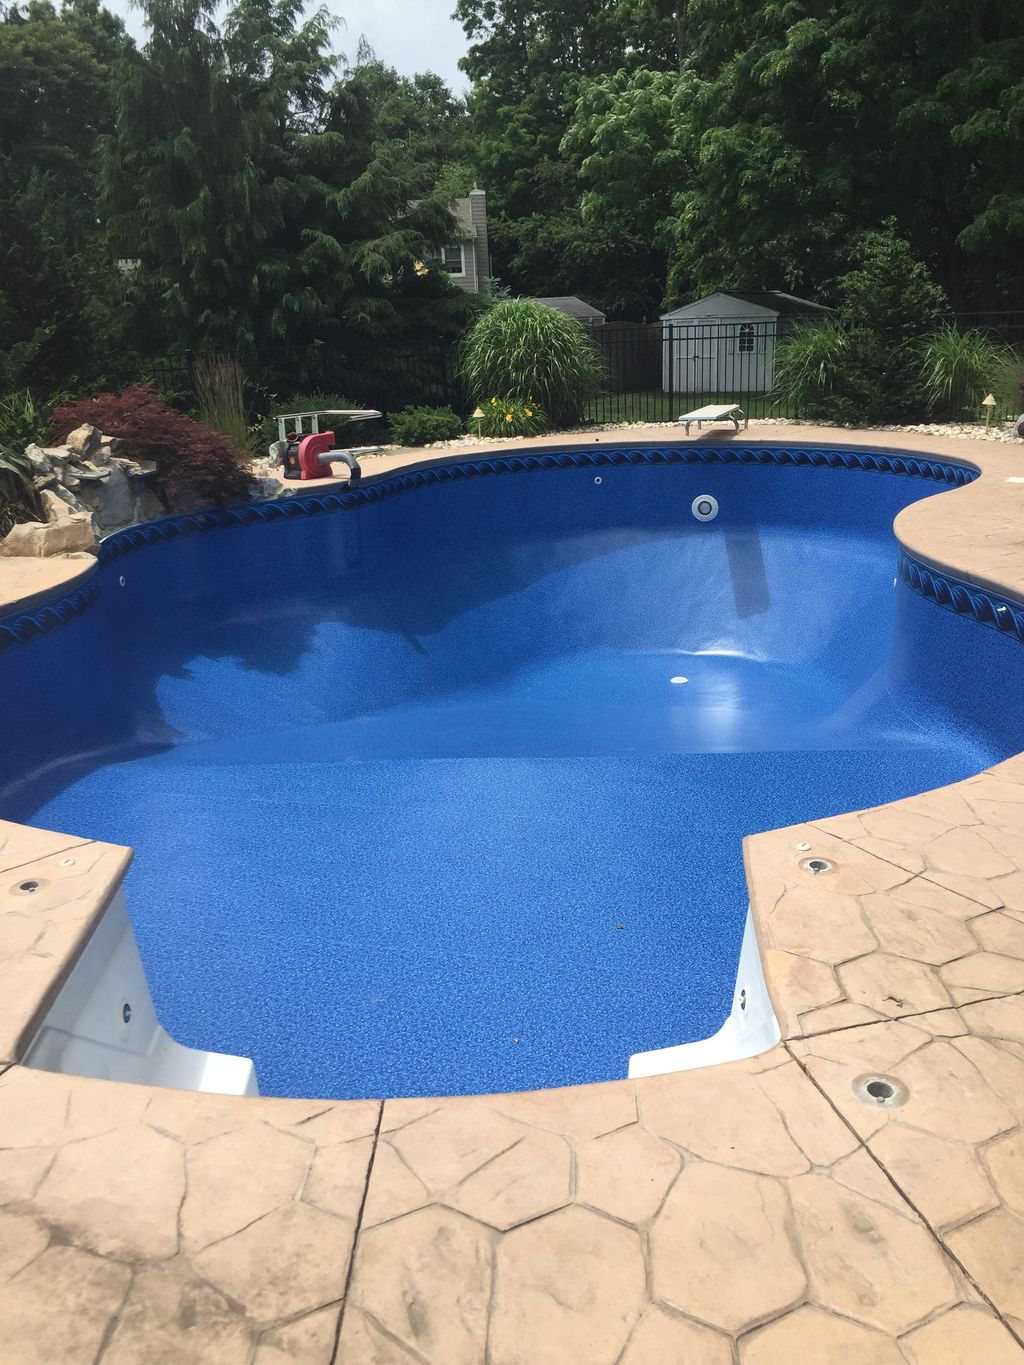 POOL LINER EXPERTS